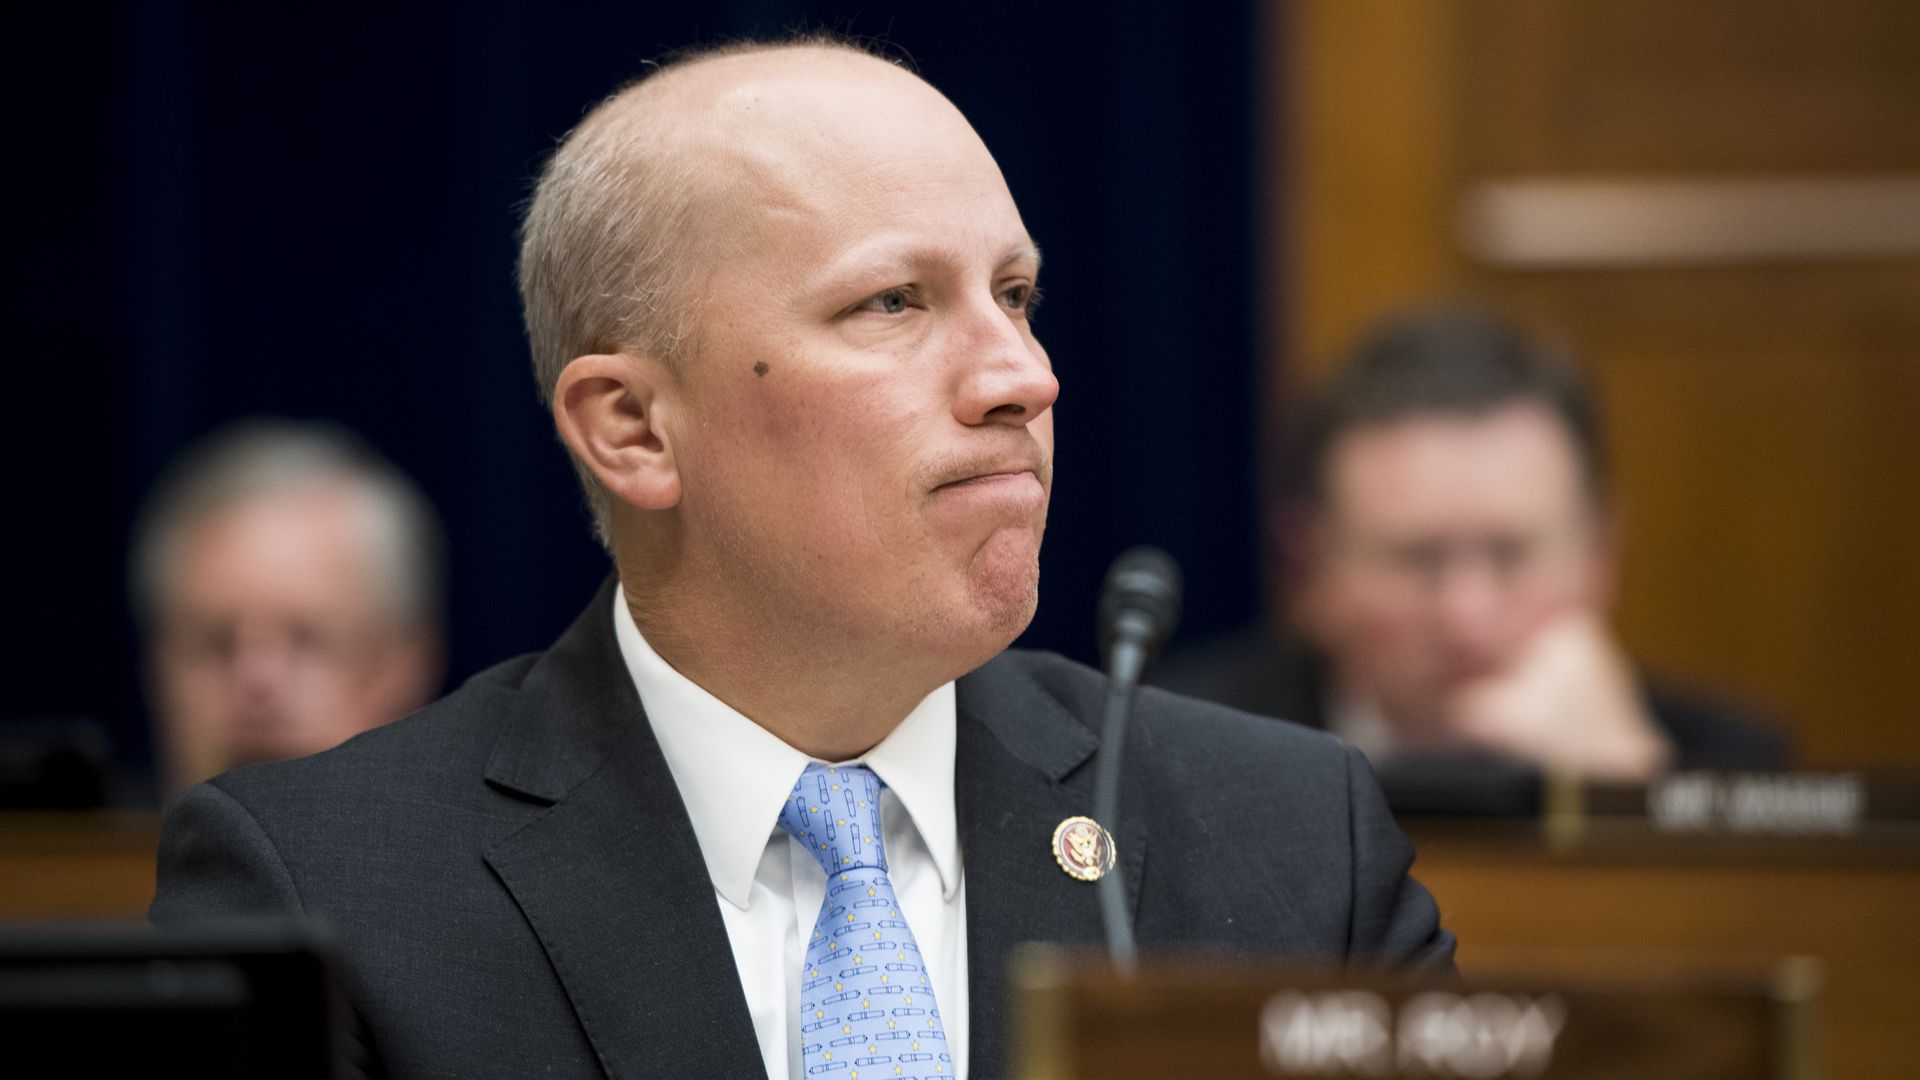 In this image, Chip Roy sits in a suit and listens in front of a microphone.